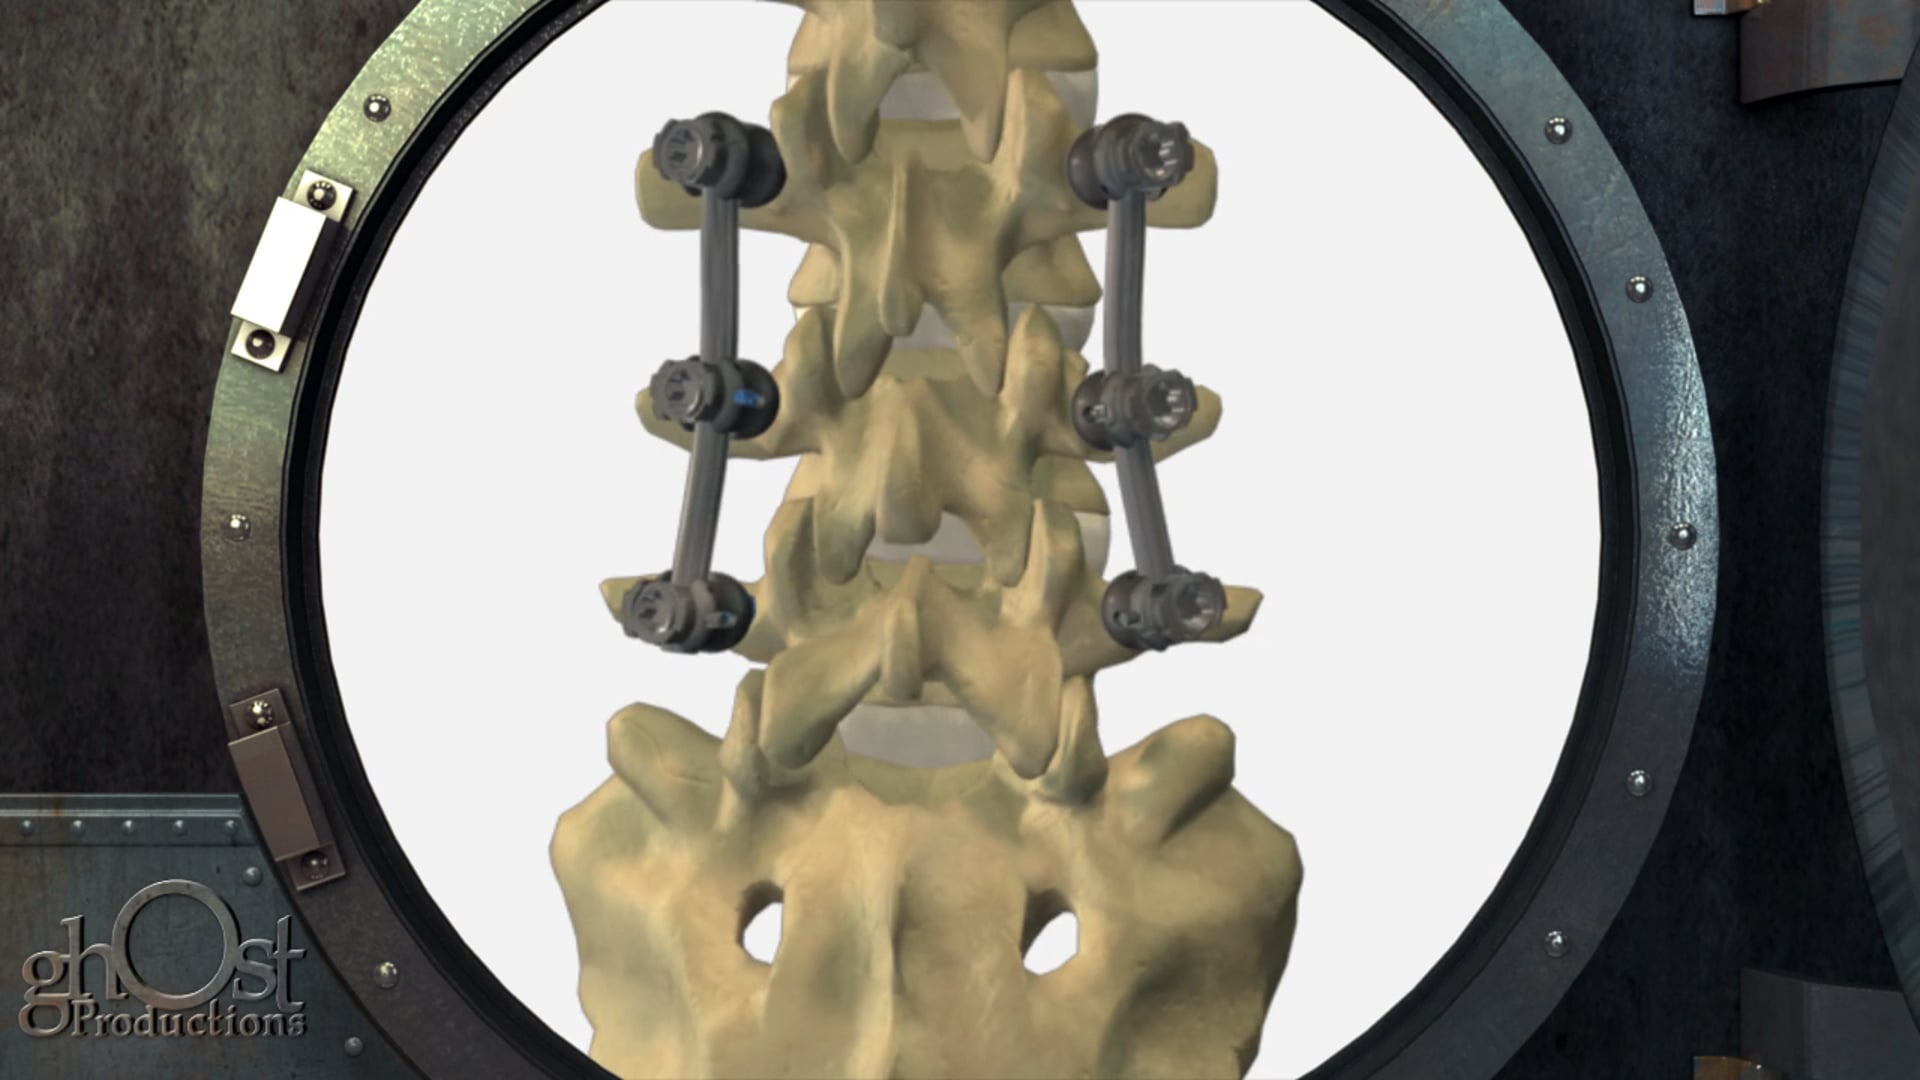 Innovative Spinal Technologies Paramount pedicle screw system